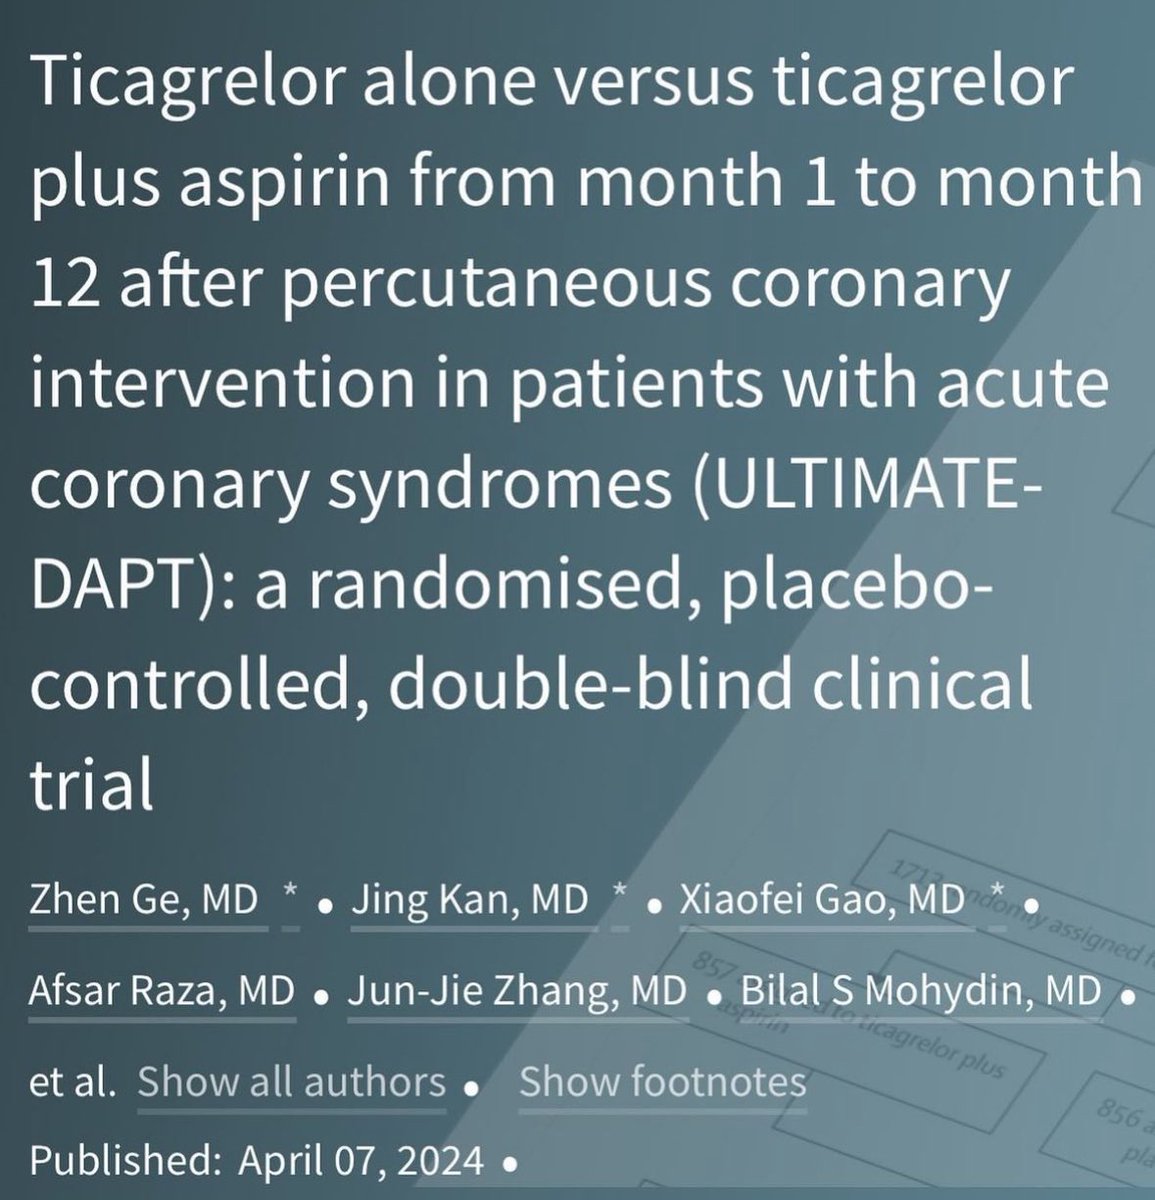 Just 1 month of DAPT after ACS? This trial showed ticagrelor monotherapy after only 1 month of DAPT to decrease bleeding WITHOUT change in ischemic events. A step in the right direction to decrease risk and pill burden in our patients. ULTIMATE-DAPT Trial, Lancet 2024 ♥️